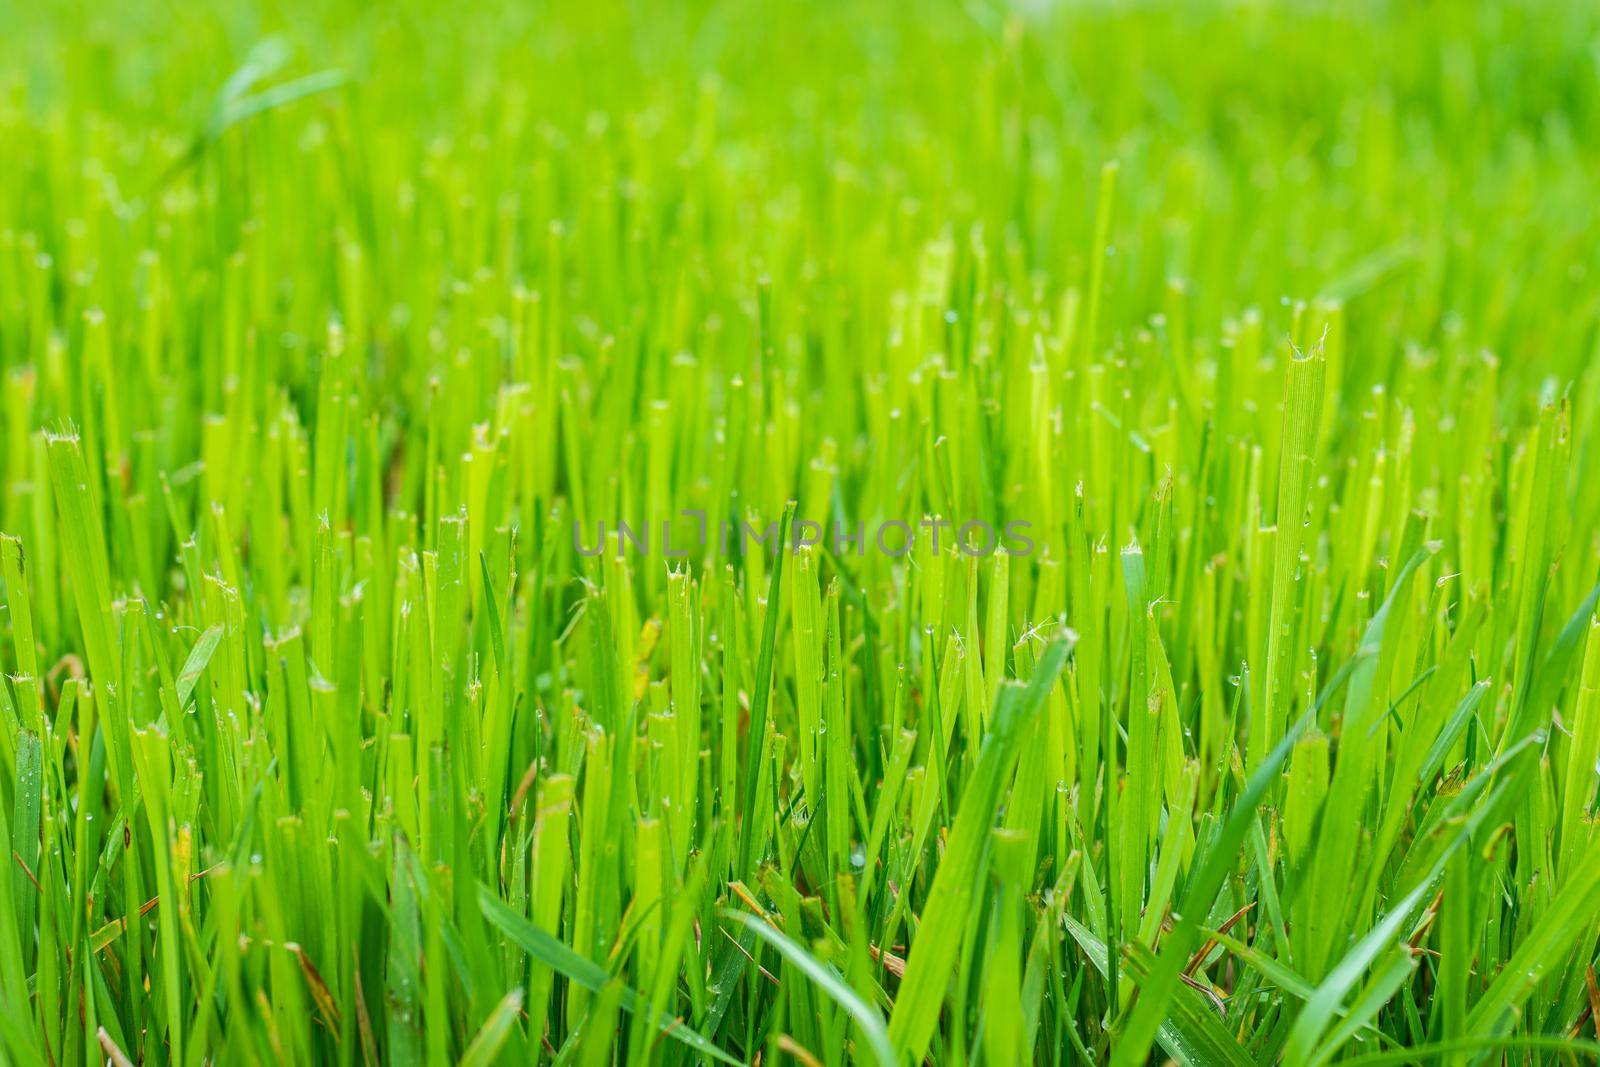 Trimmed fresh lawn close up a